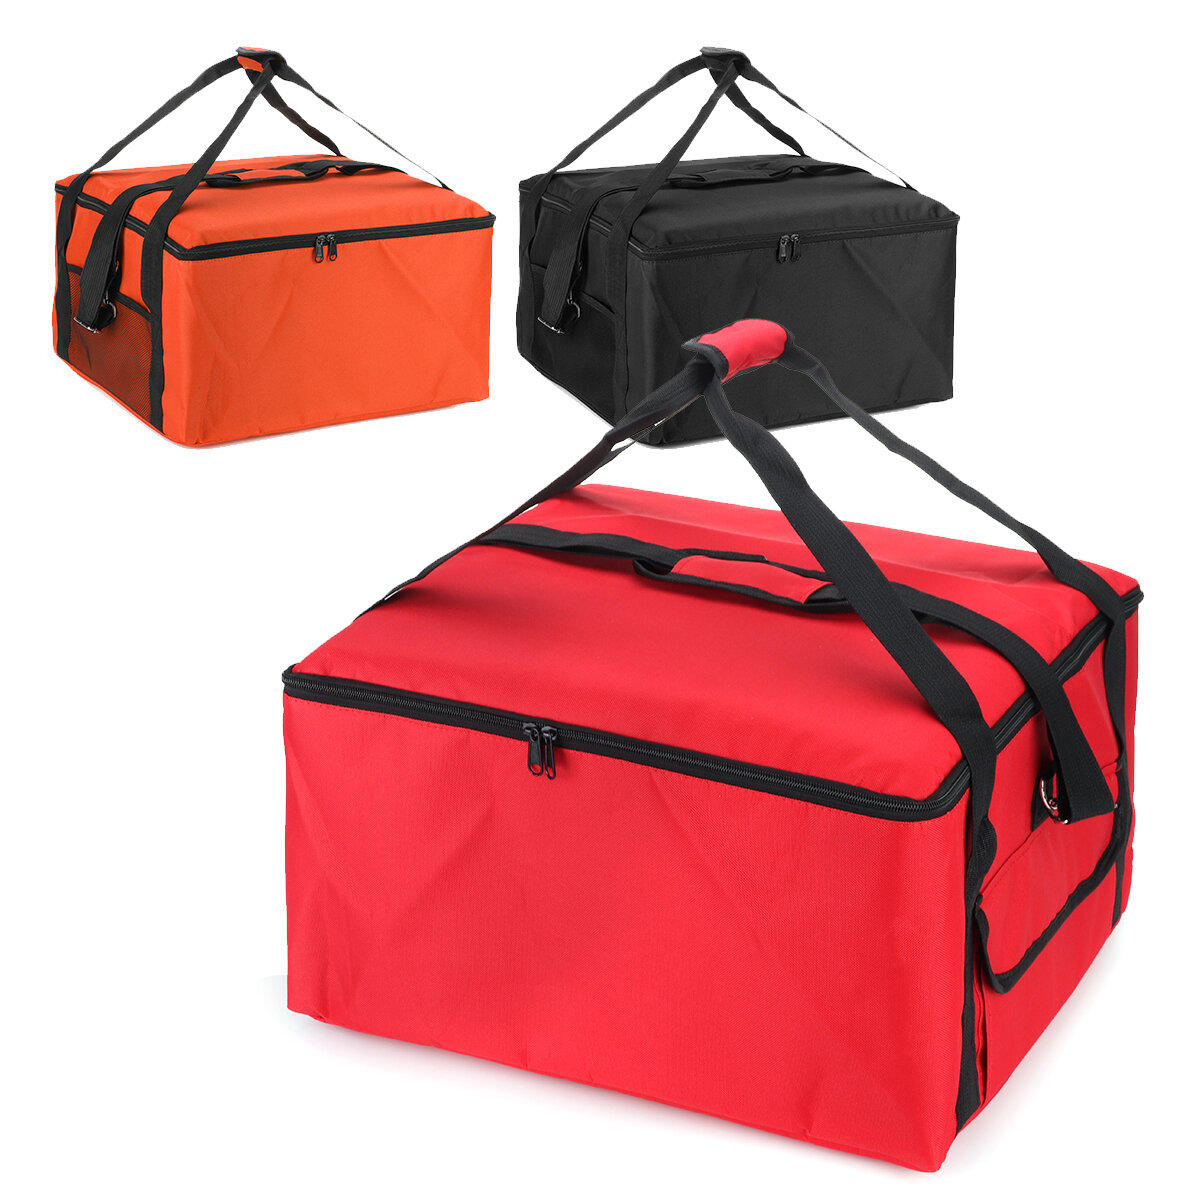 16" Waterproof Pizza Insulated Bag Cooler Bag Insulation Folding Picnic Portable Ice Pack Food Thermal Delivery Bag